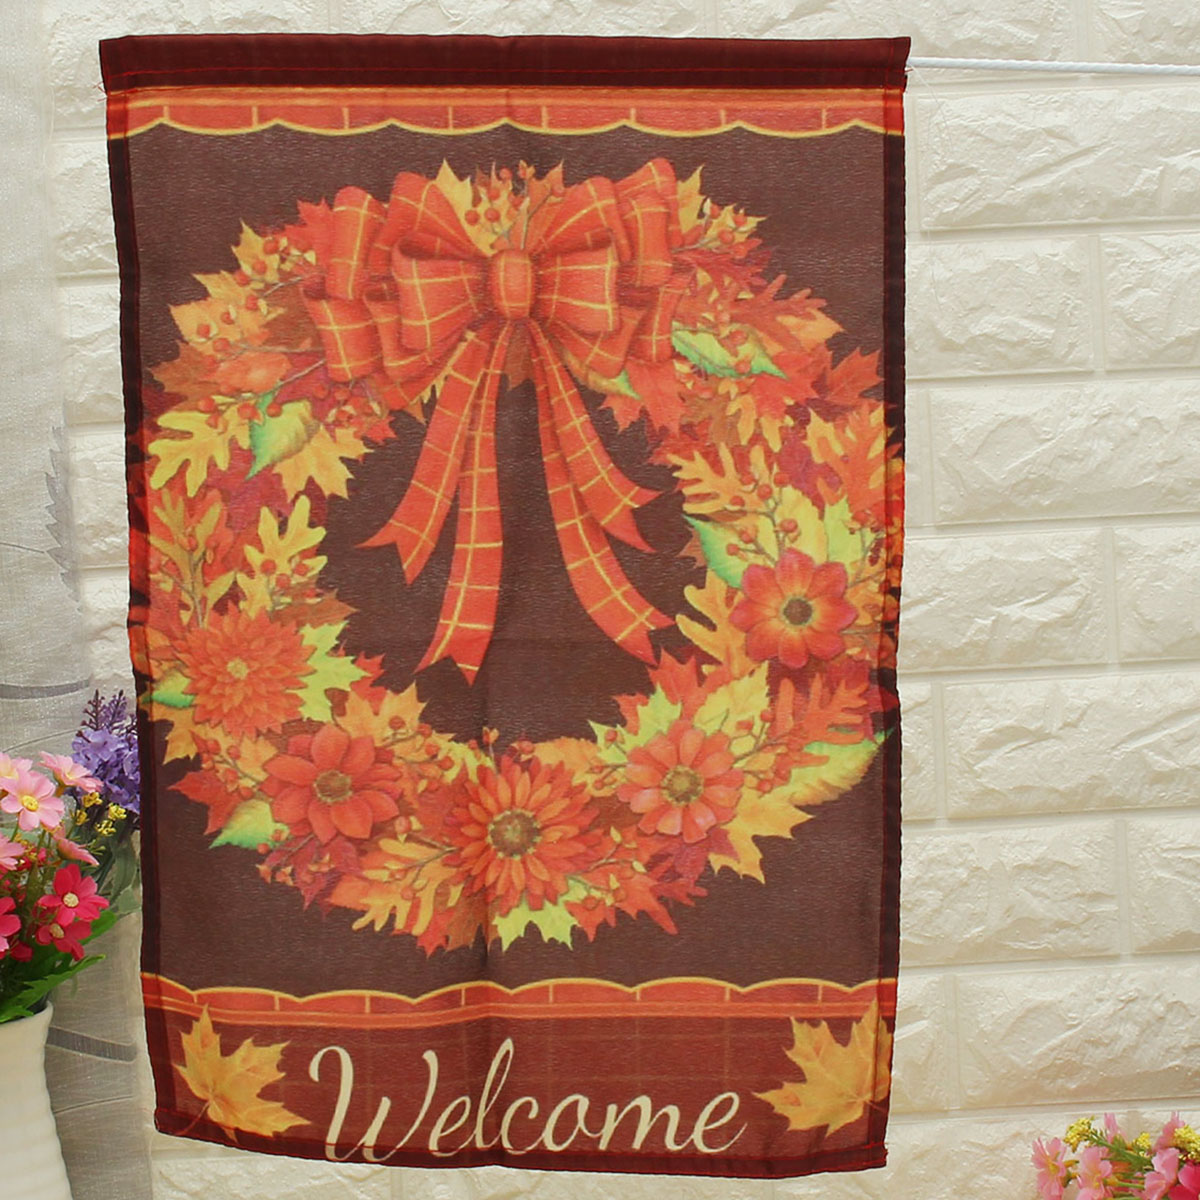 125x18-Fall-Wreath-Garden-Flag-Welcome-Autumn-Leaves-Floral-Briarwood-Lane-Decorations-1343584-2